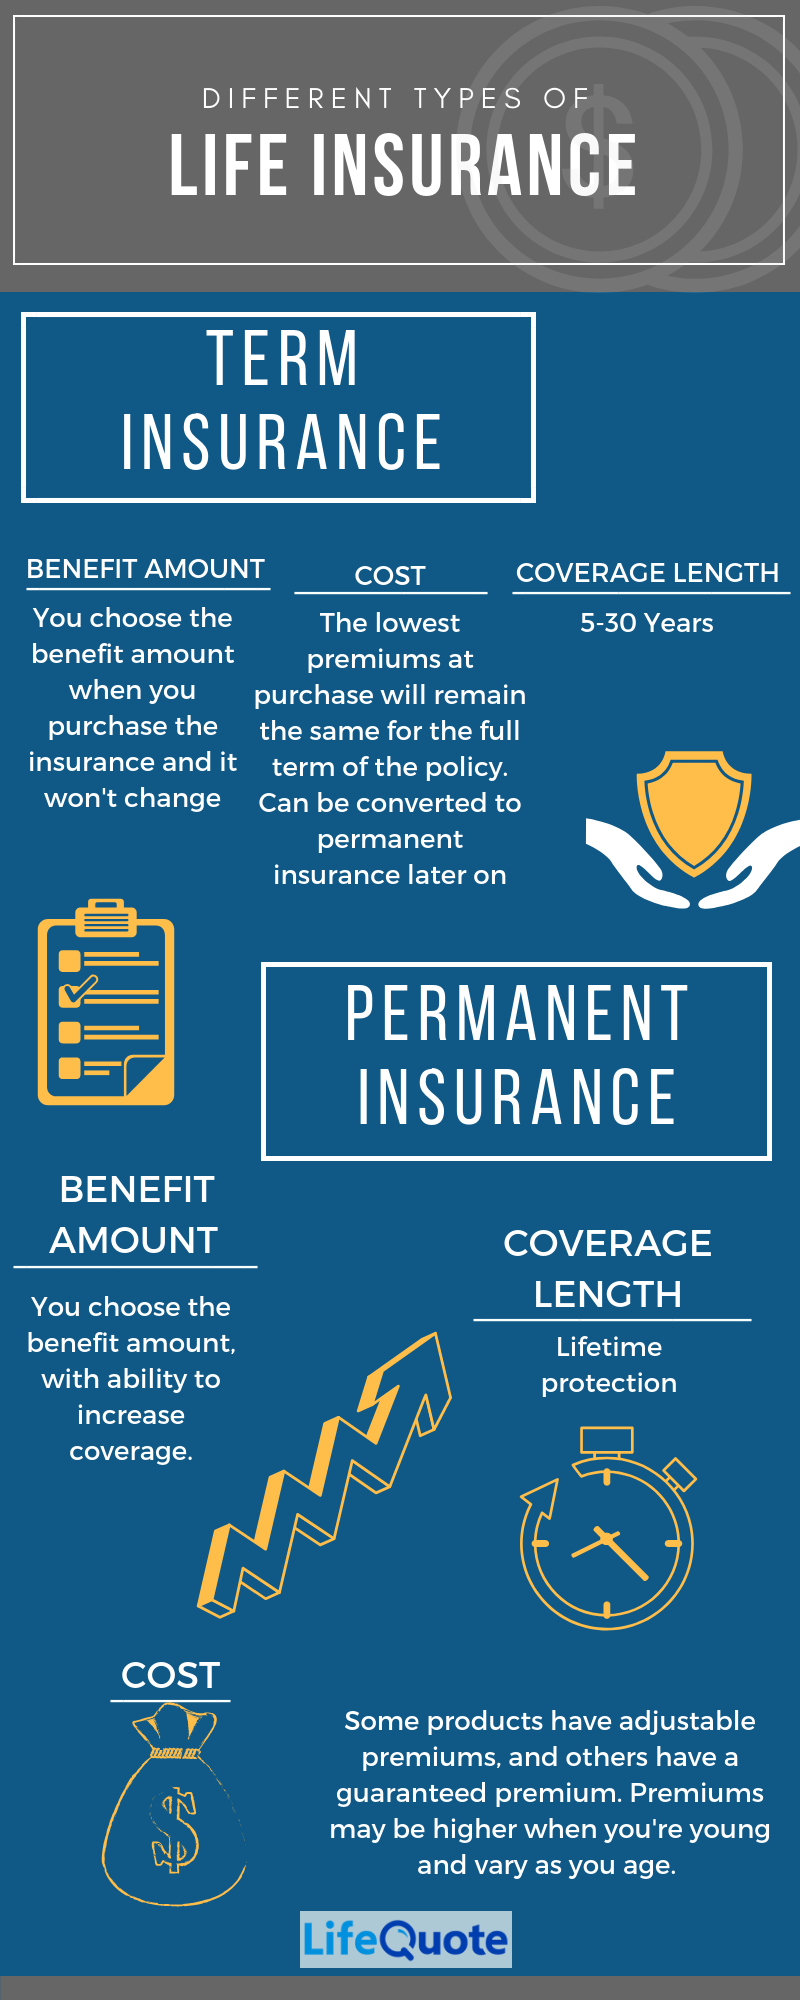 Infographic: Different Types of Life Insurance